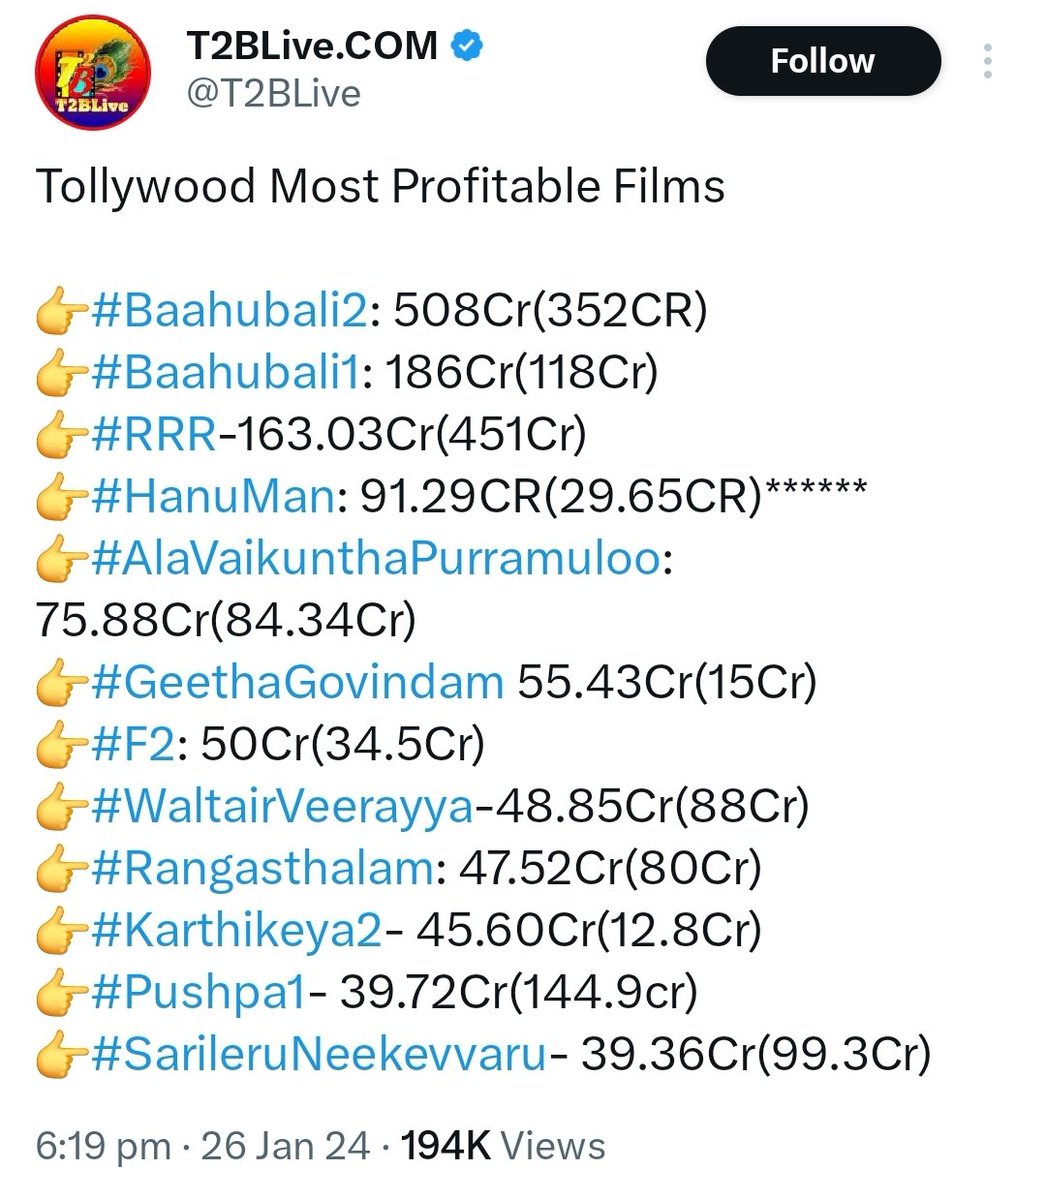 There is no prabas movie in this list..so dnt reply to this worthless shit

PS-Bahubali is SSR movie